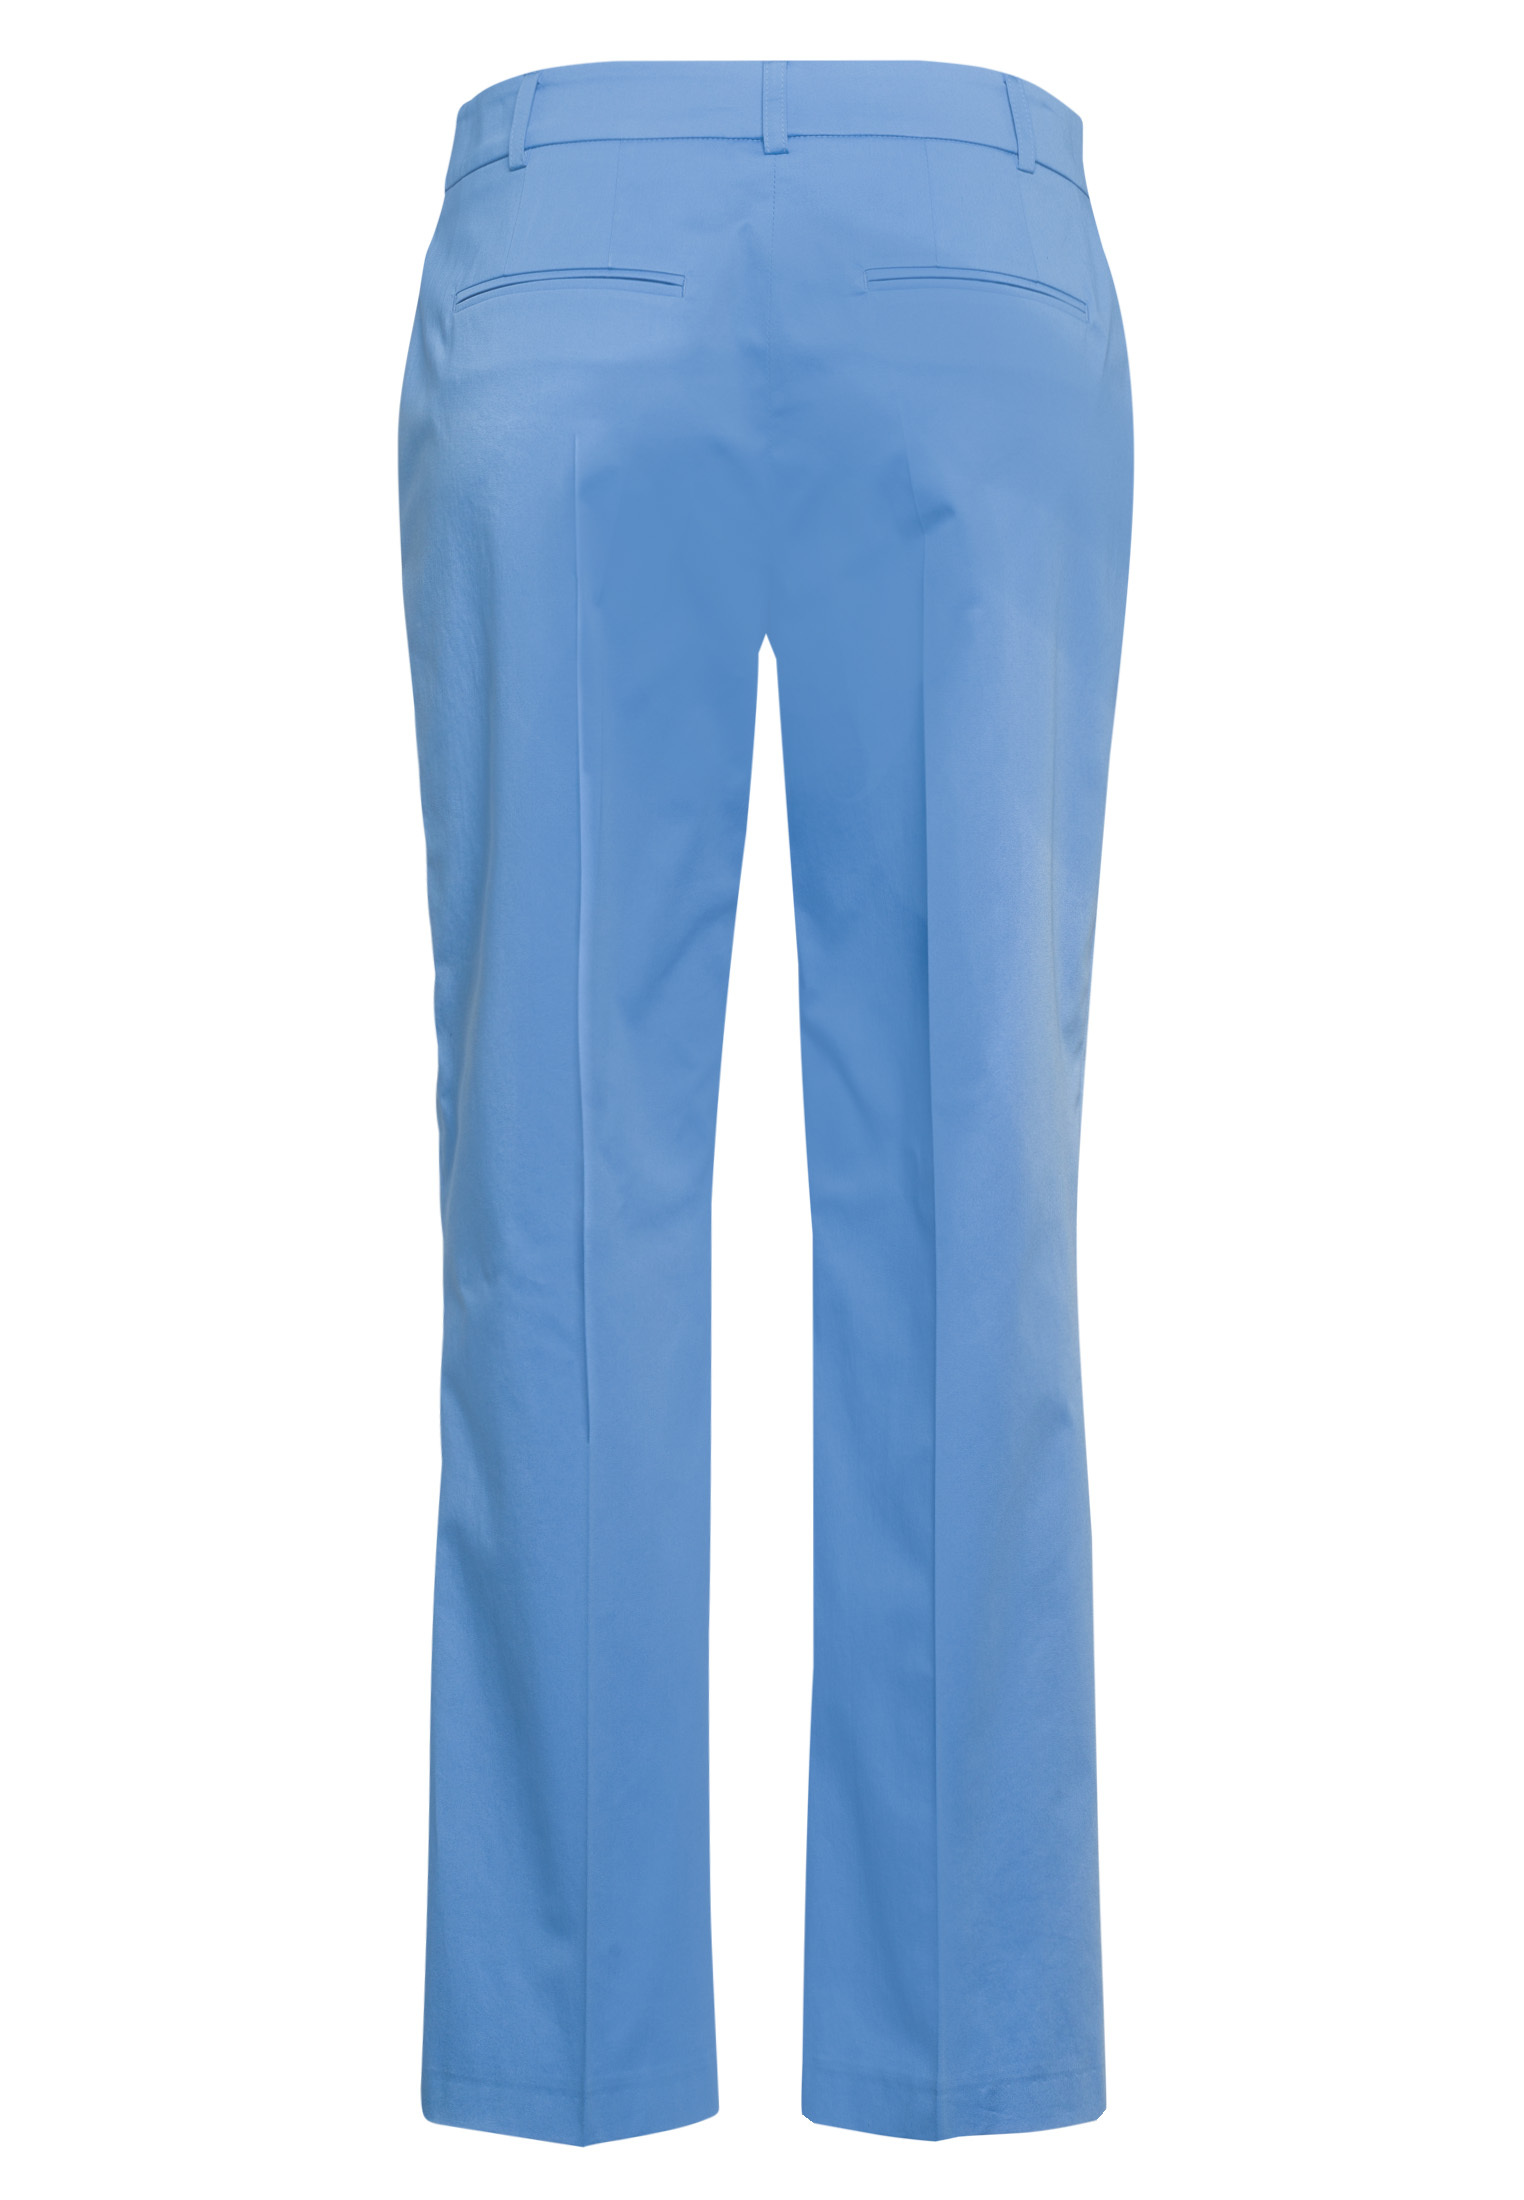 Cloth Trouser with crease | Trousers & Jeans | Fashion